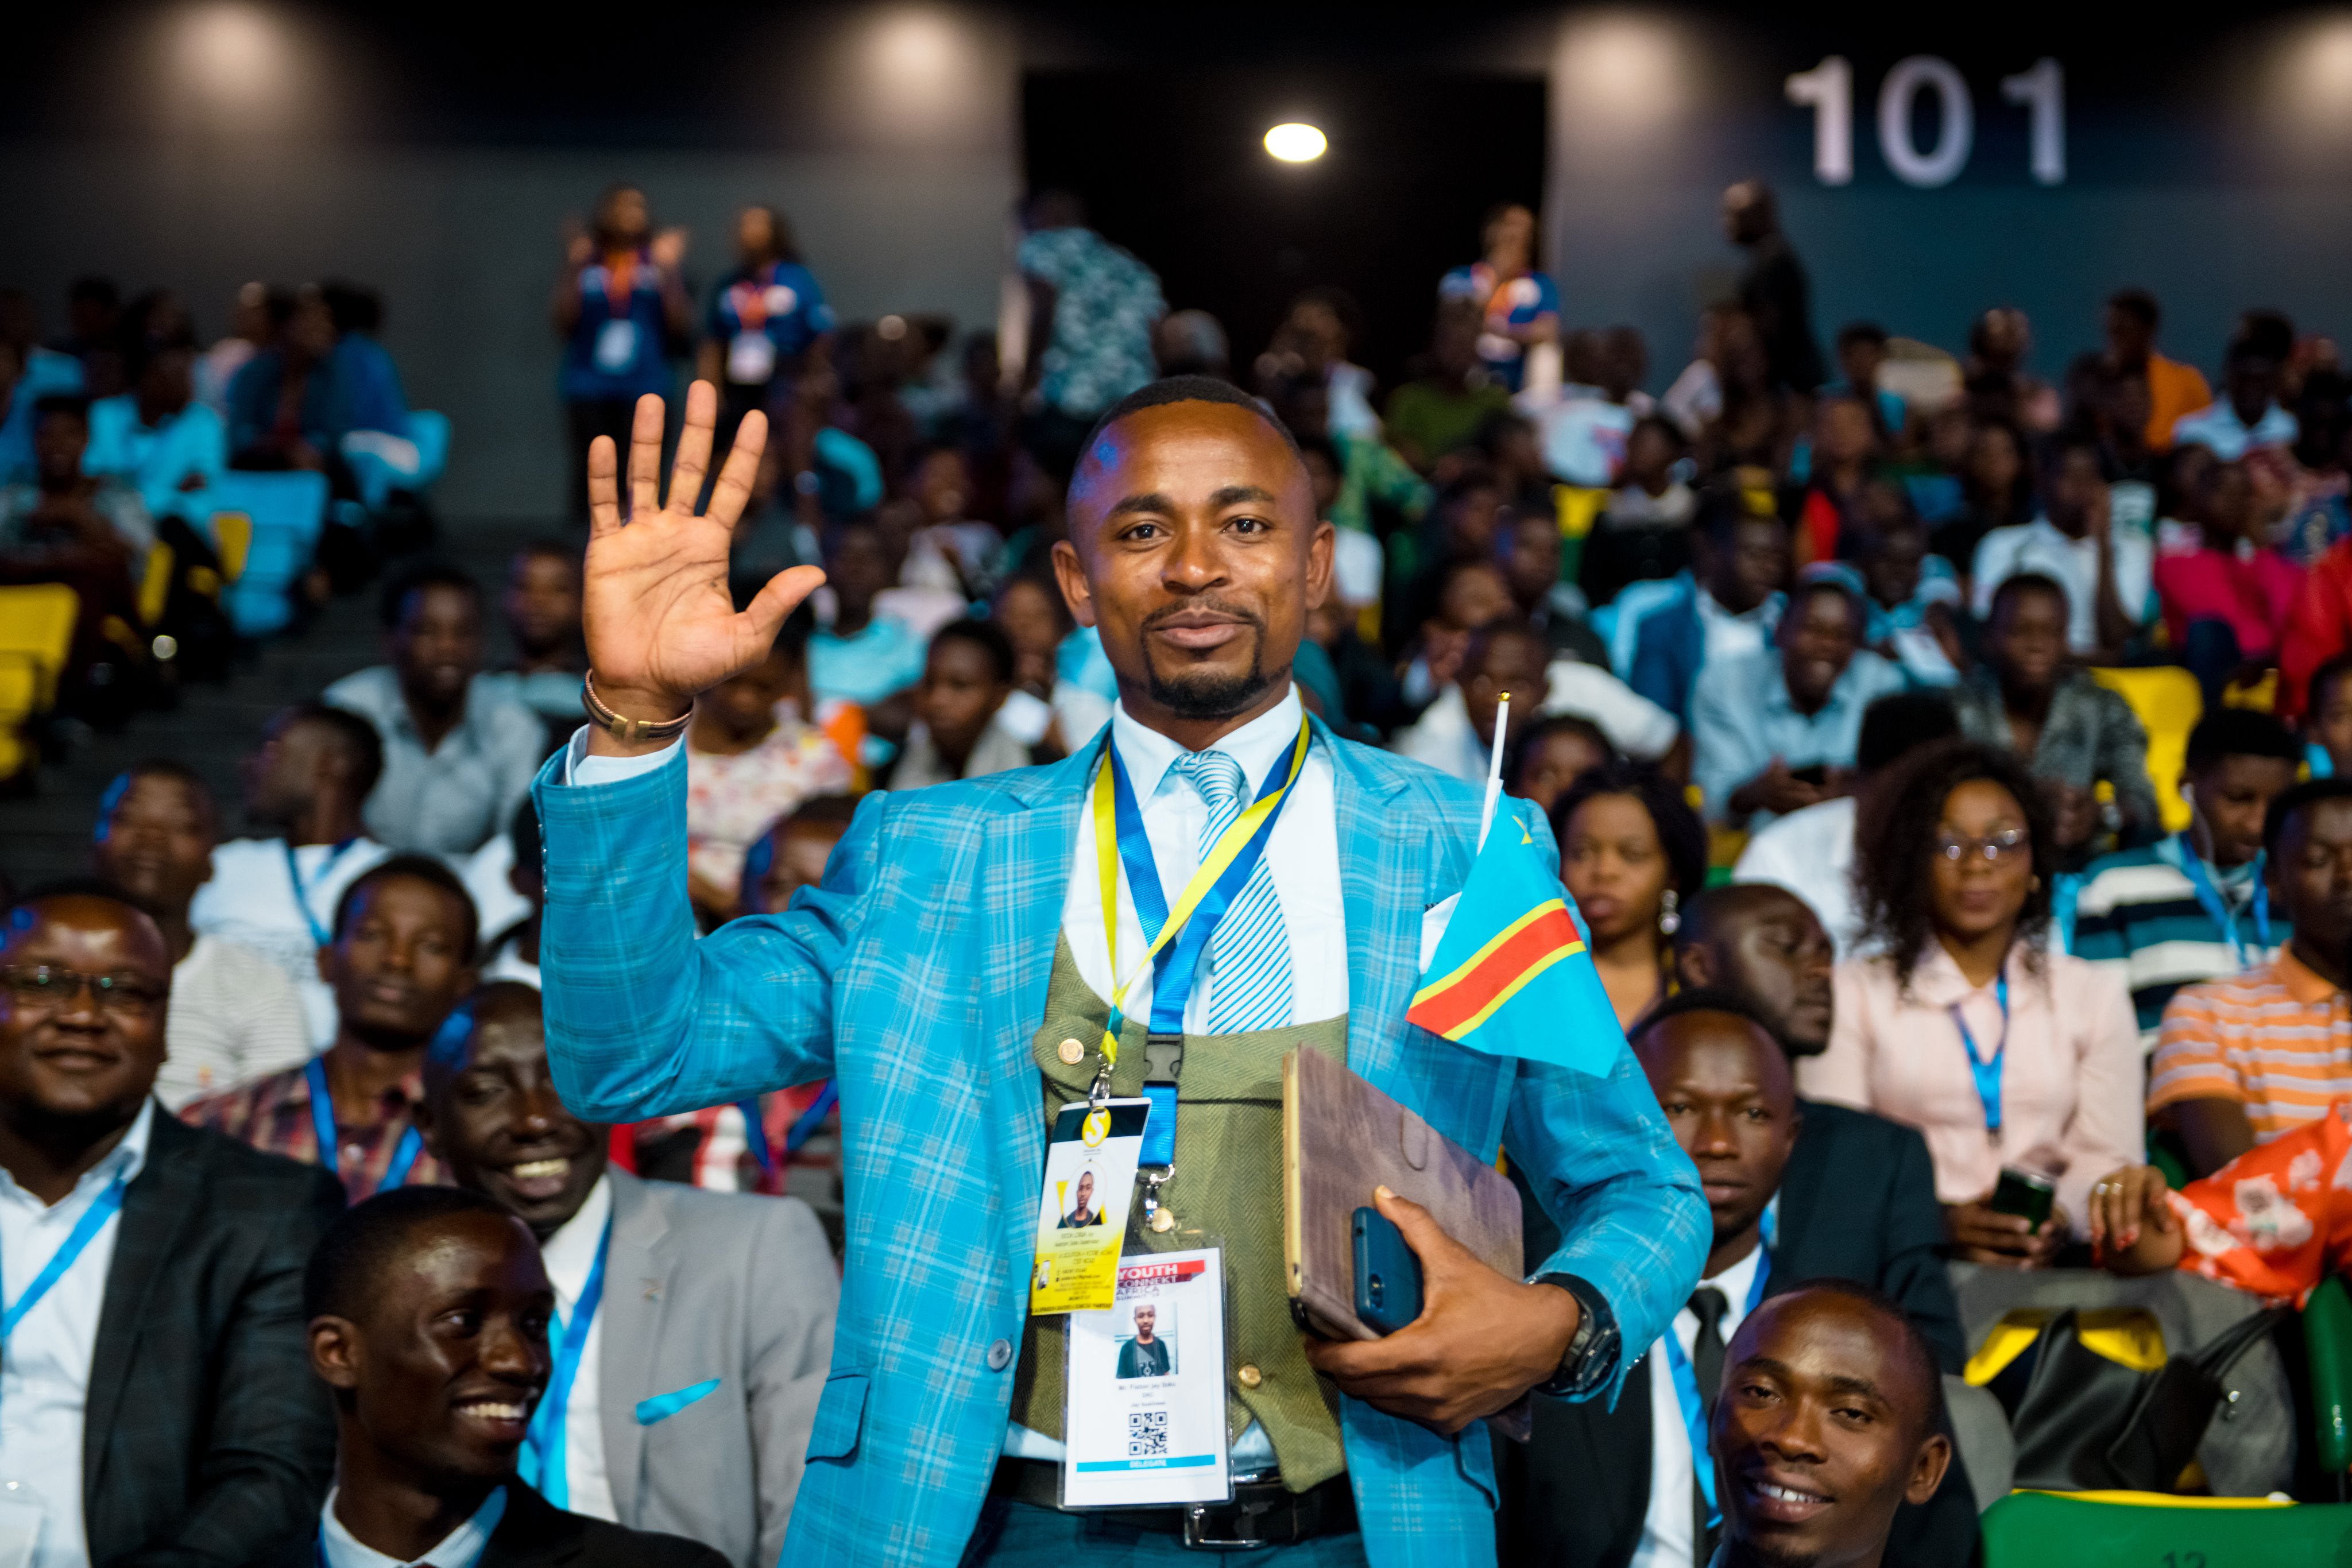 A delegate from DRC poses for the camera at the 2019 Youth Connekt summit. Courtesy 